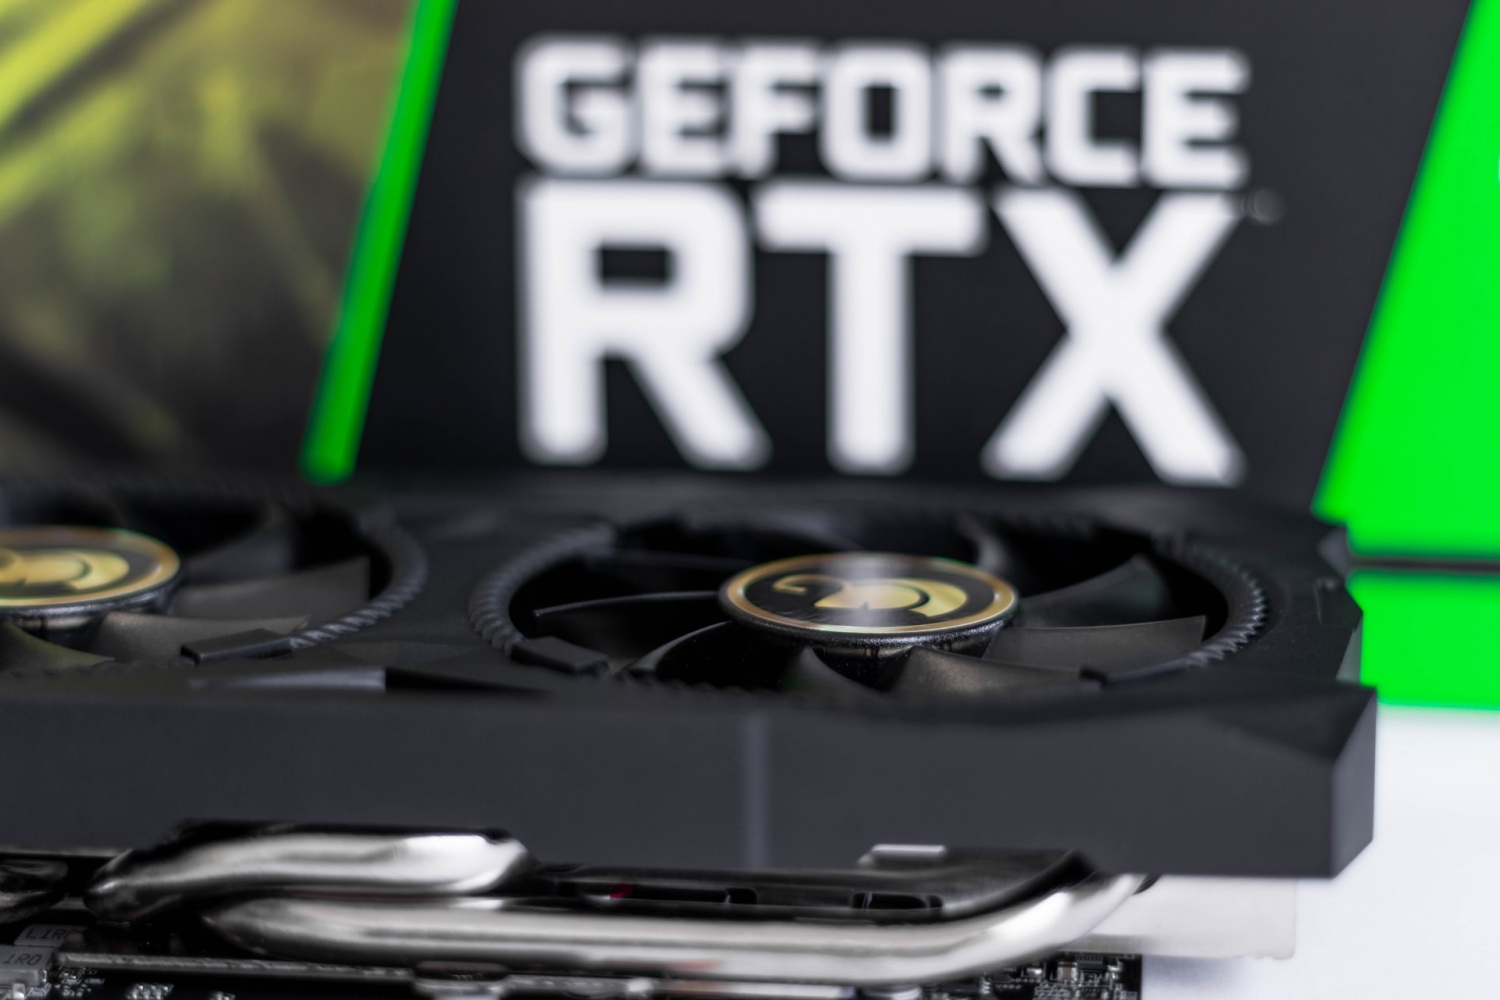 Nvidia GeForce RTX 3080 Ti Confirmed on Leaked Photo: Specs, Possible Release Date and Rumored Crazy Price!